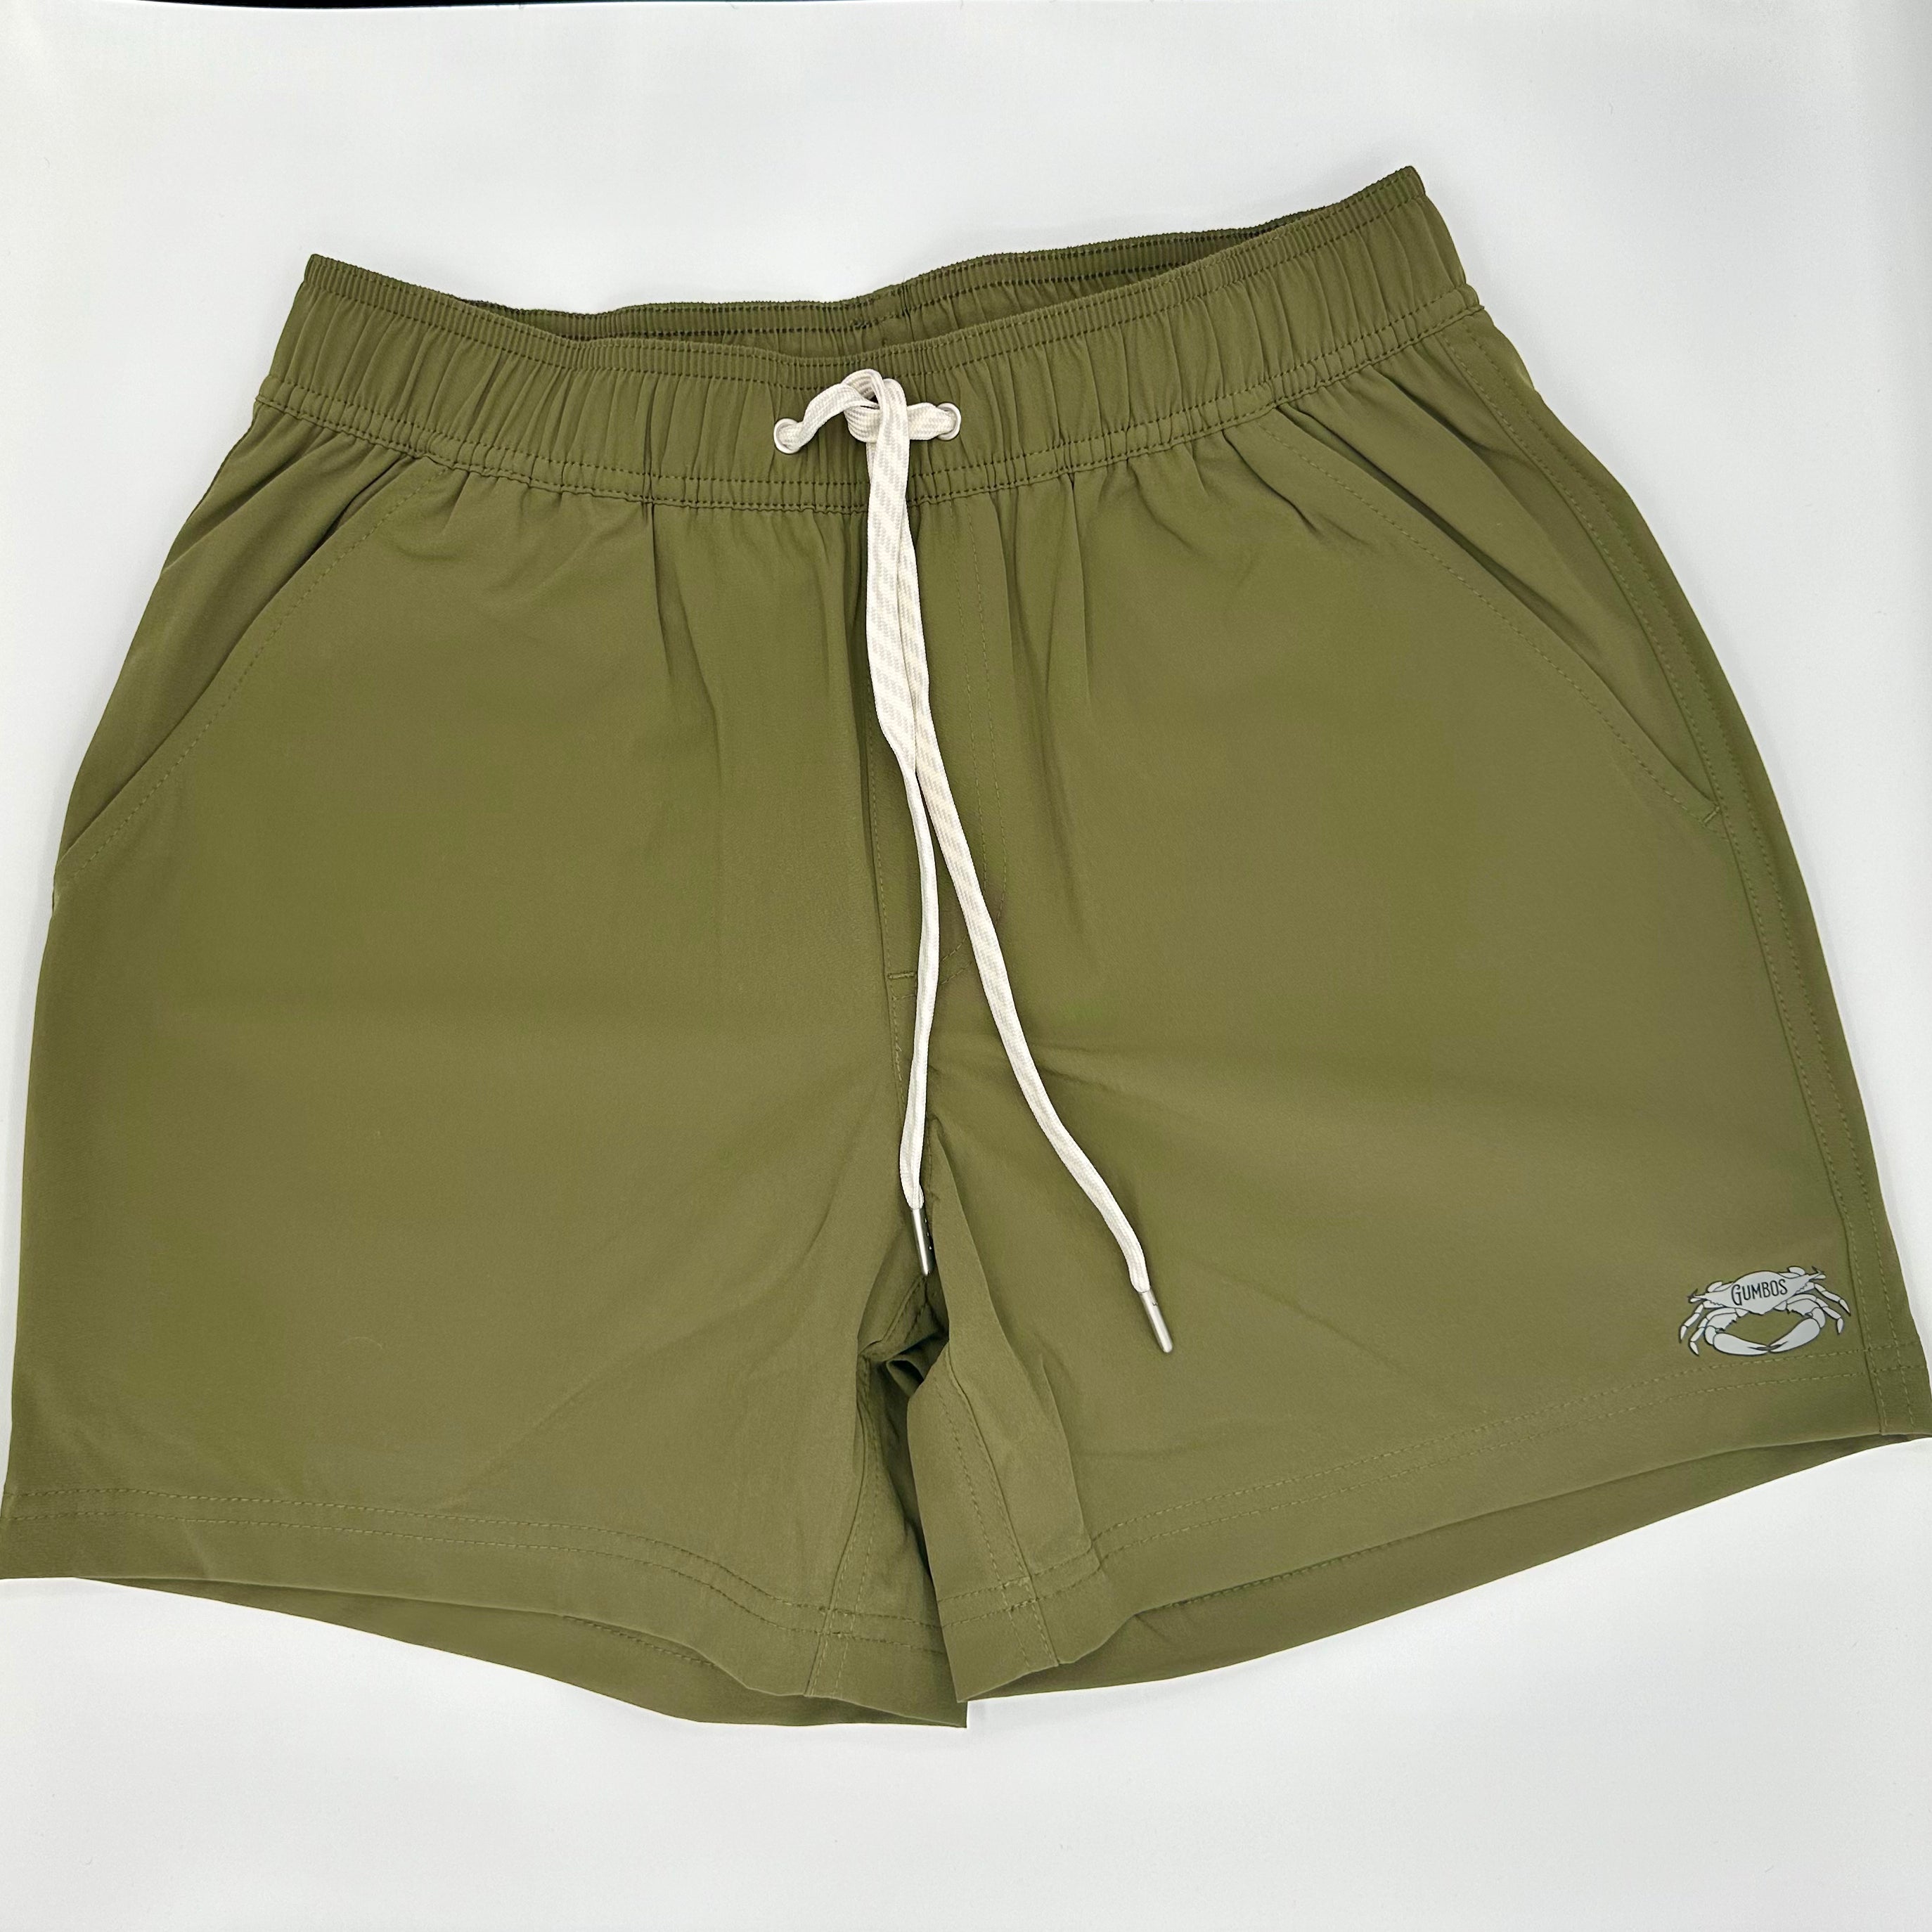 Gumbos Active Shorts 5" Inseam with Liner